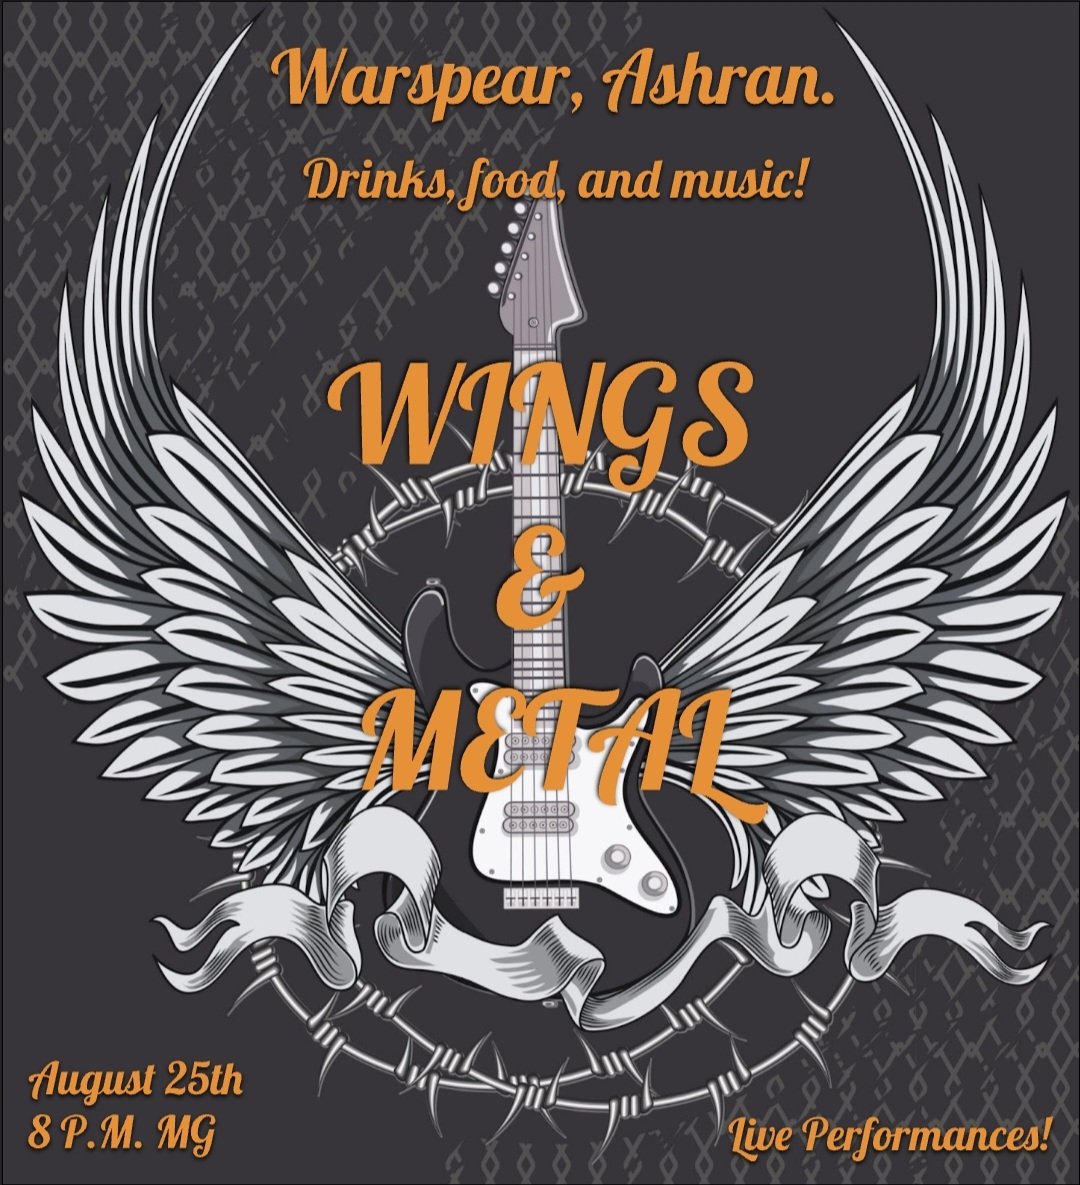 Come out and see us for a night of music, wings and drinks! 
Doors open at 6 WrA, 8 MG. 

Anchors:
A- Ranék-MoonGuard
H- Working on it!

Want to perform or work at Wings and Metal? DM me! Ranek#1085 Staff is volunteer so if you want to meet and greet, let me know!